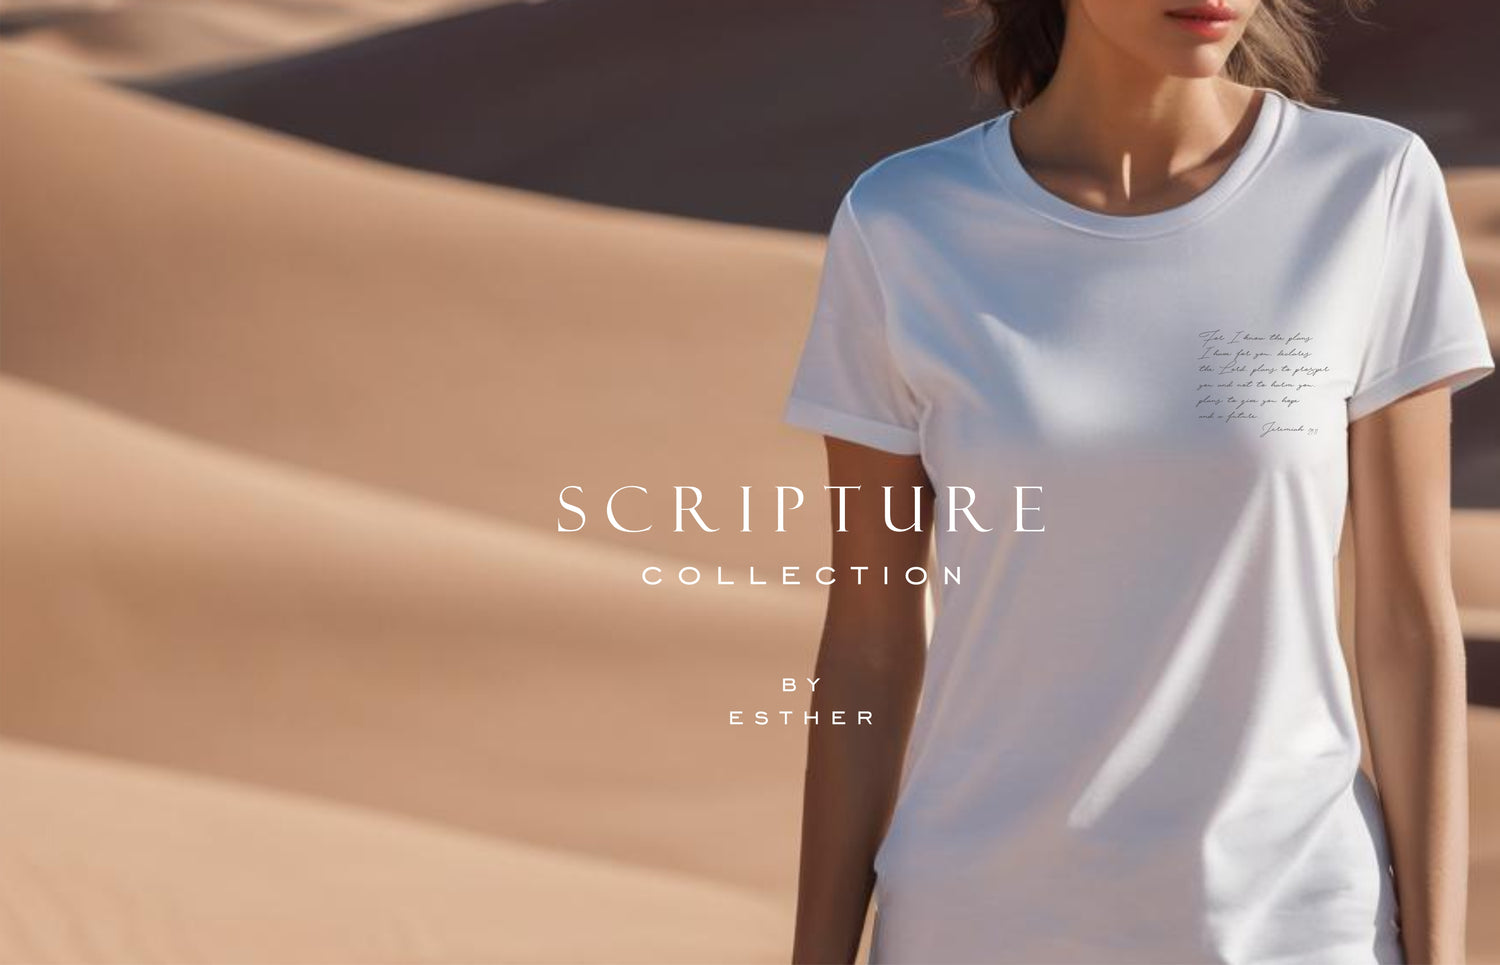 SCRIPTURE COLLECTION